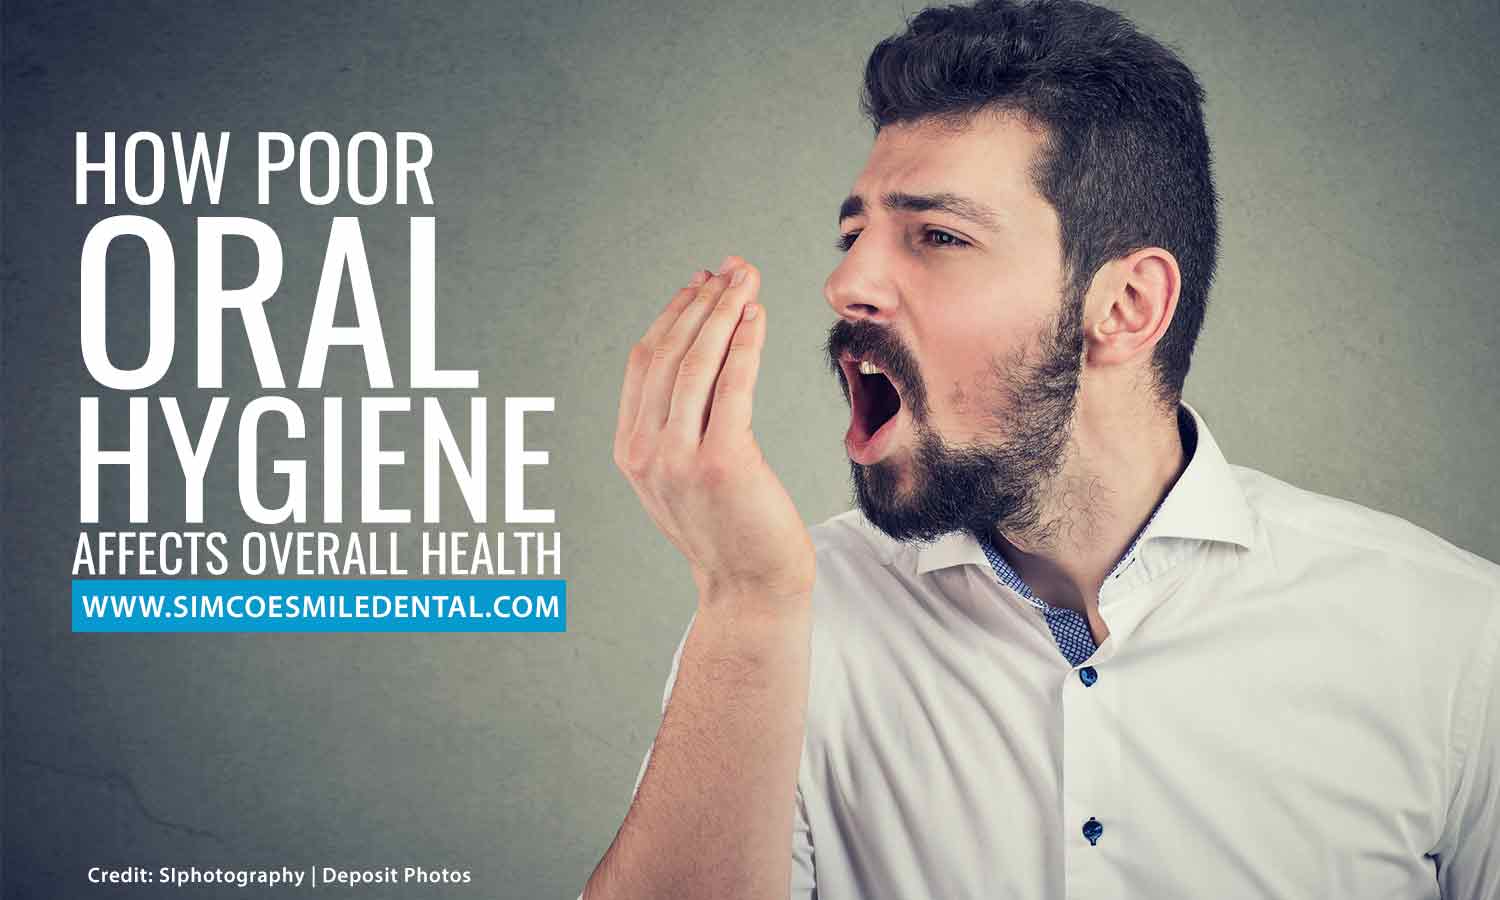 How Poor Oral Hygiene Affects Overall Health